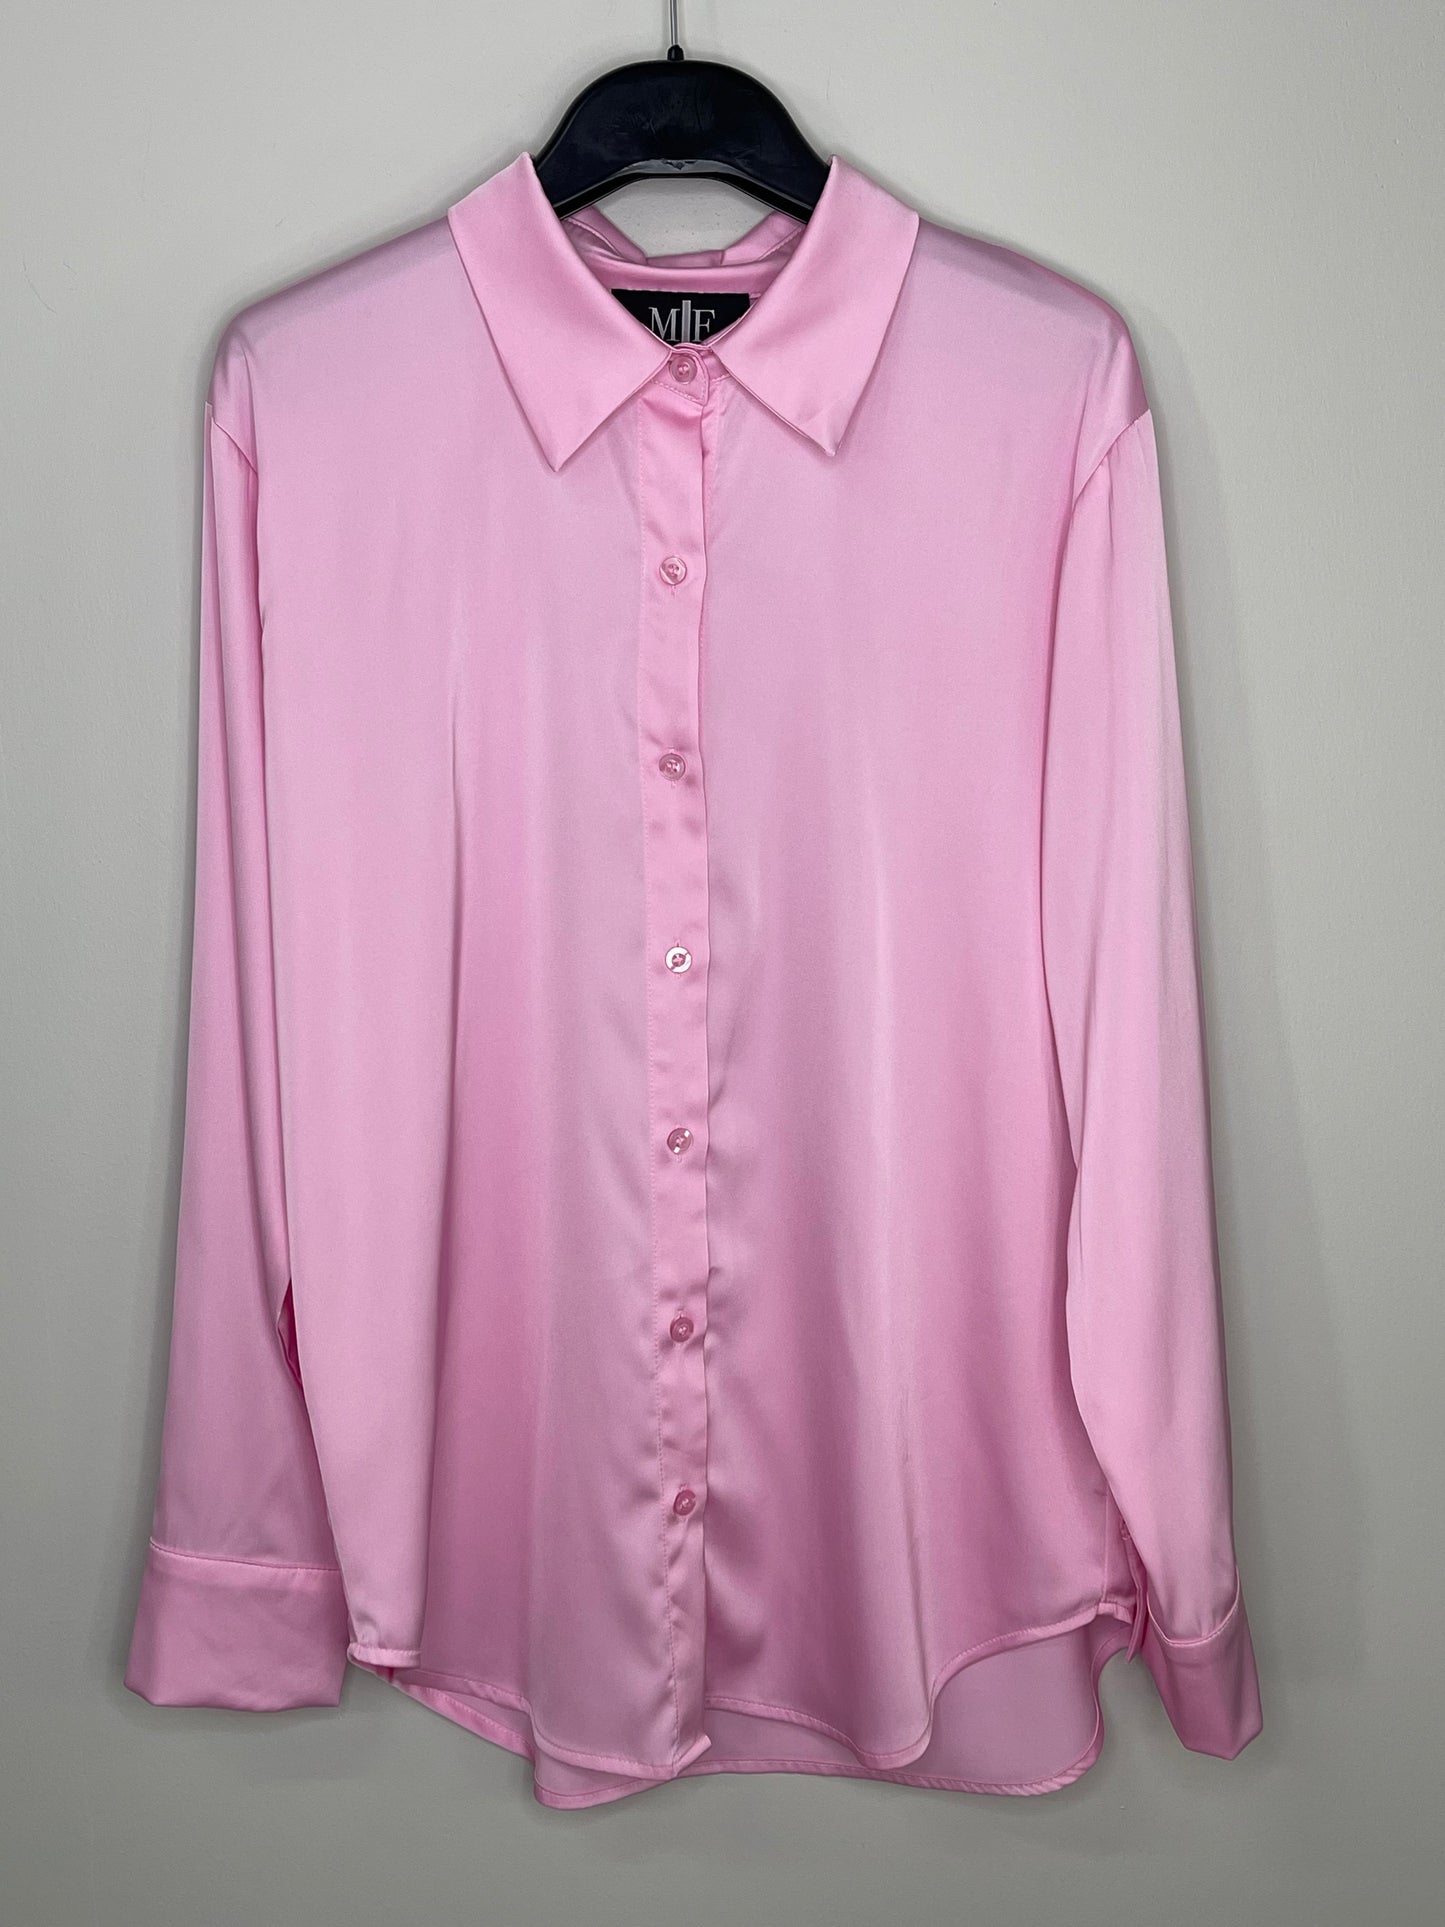 Shirt, Silky Light Pink, Love Repeater